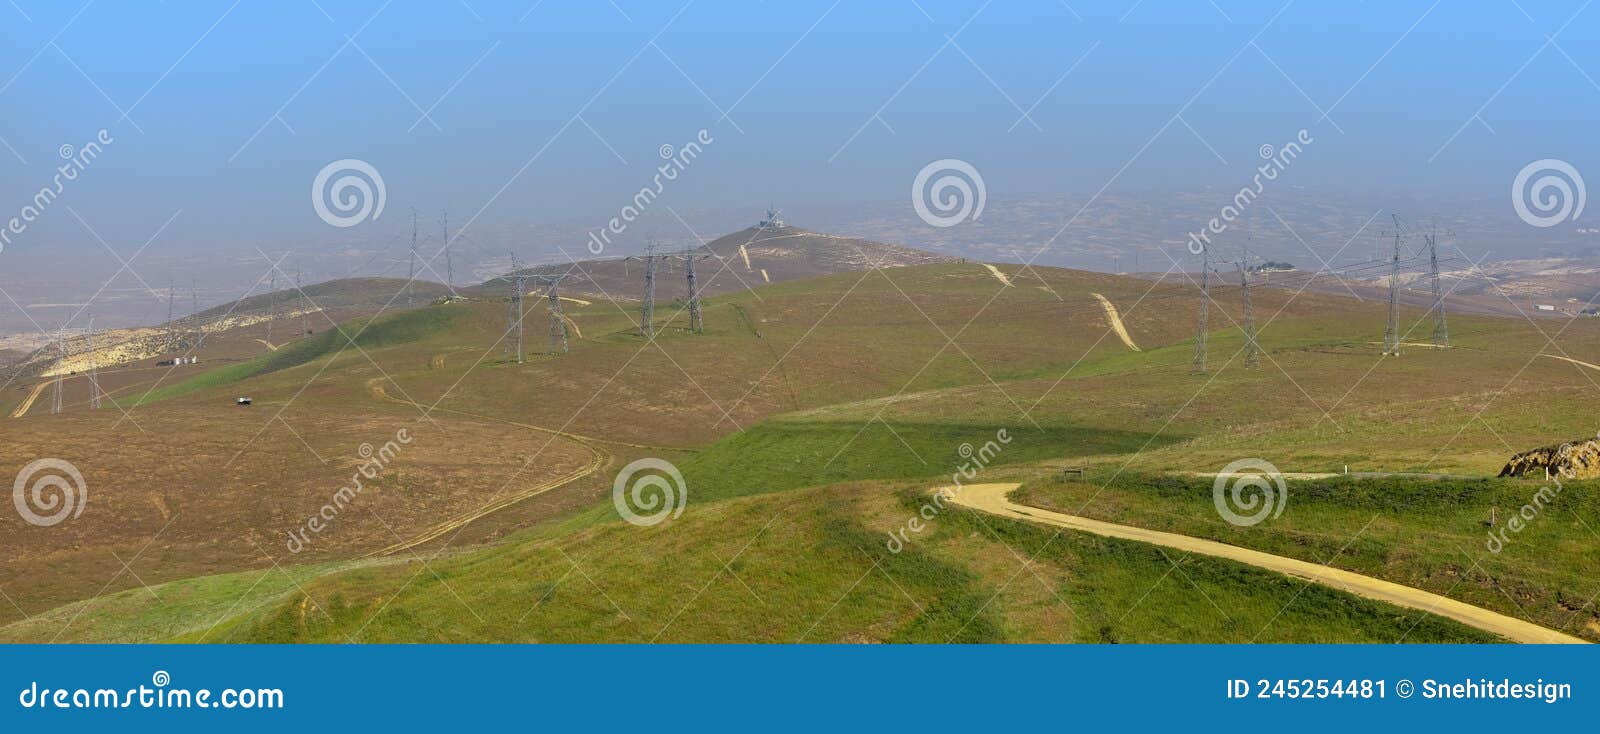 large electrical transmission structures , rolling hills in california covered with mist